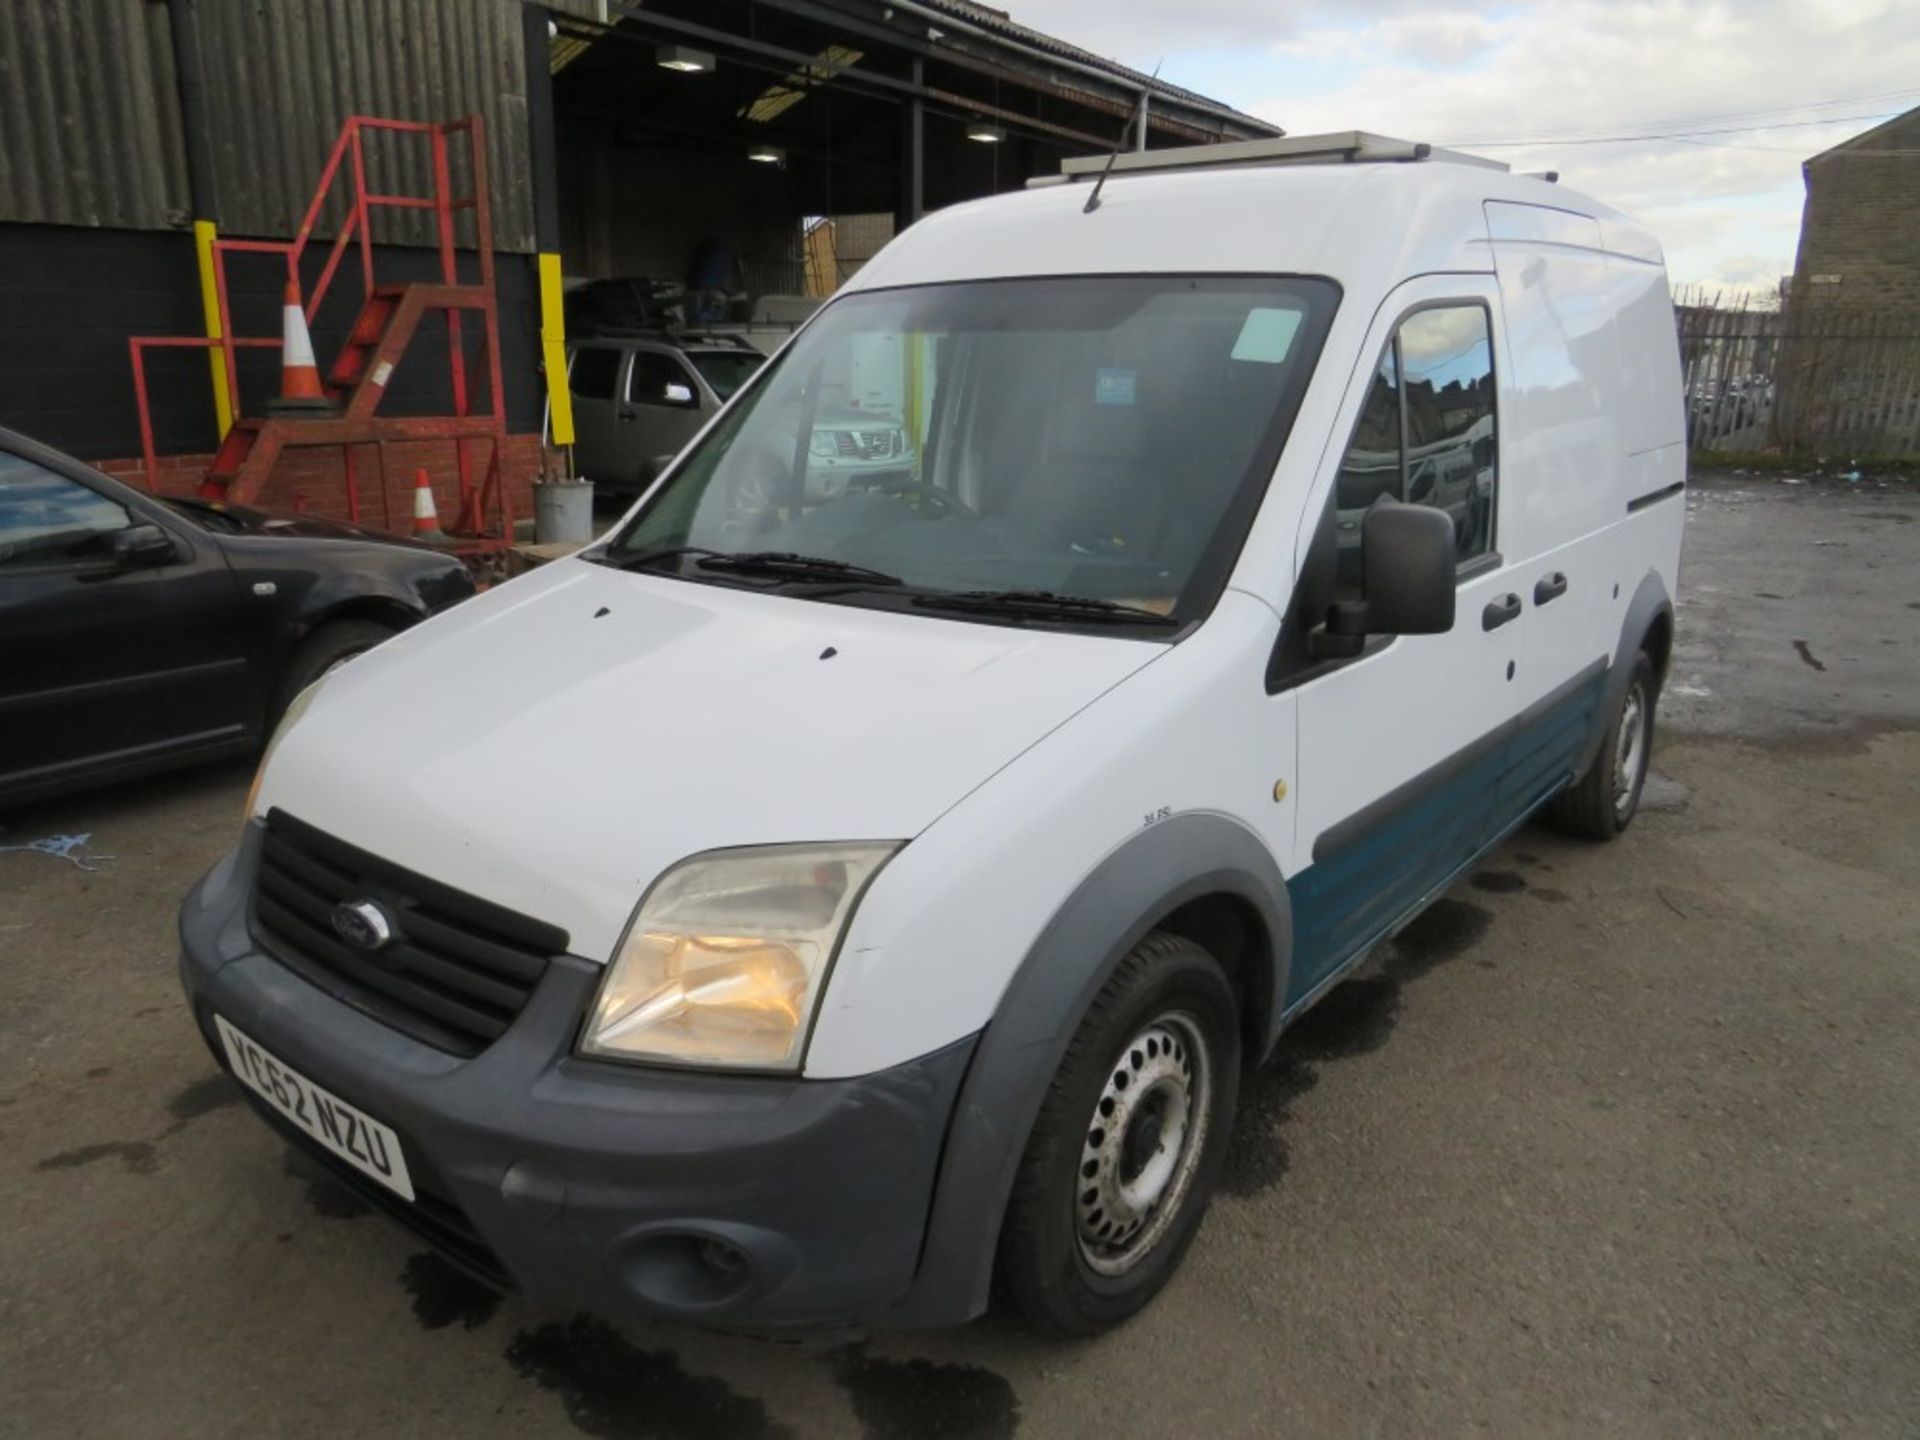 62 reg FORD TRANSIT CONNECT 90 T230 (DIRECT UNITED UTILITIES WATER) 1ST REG 10/12, TEST 09/21, - Image 2 of 7